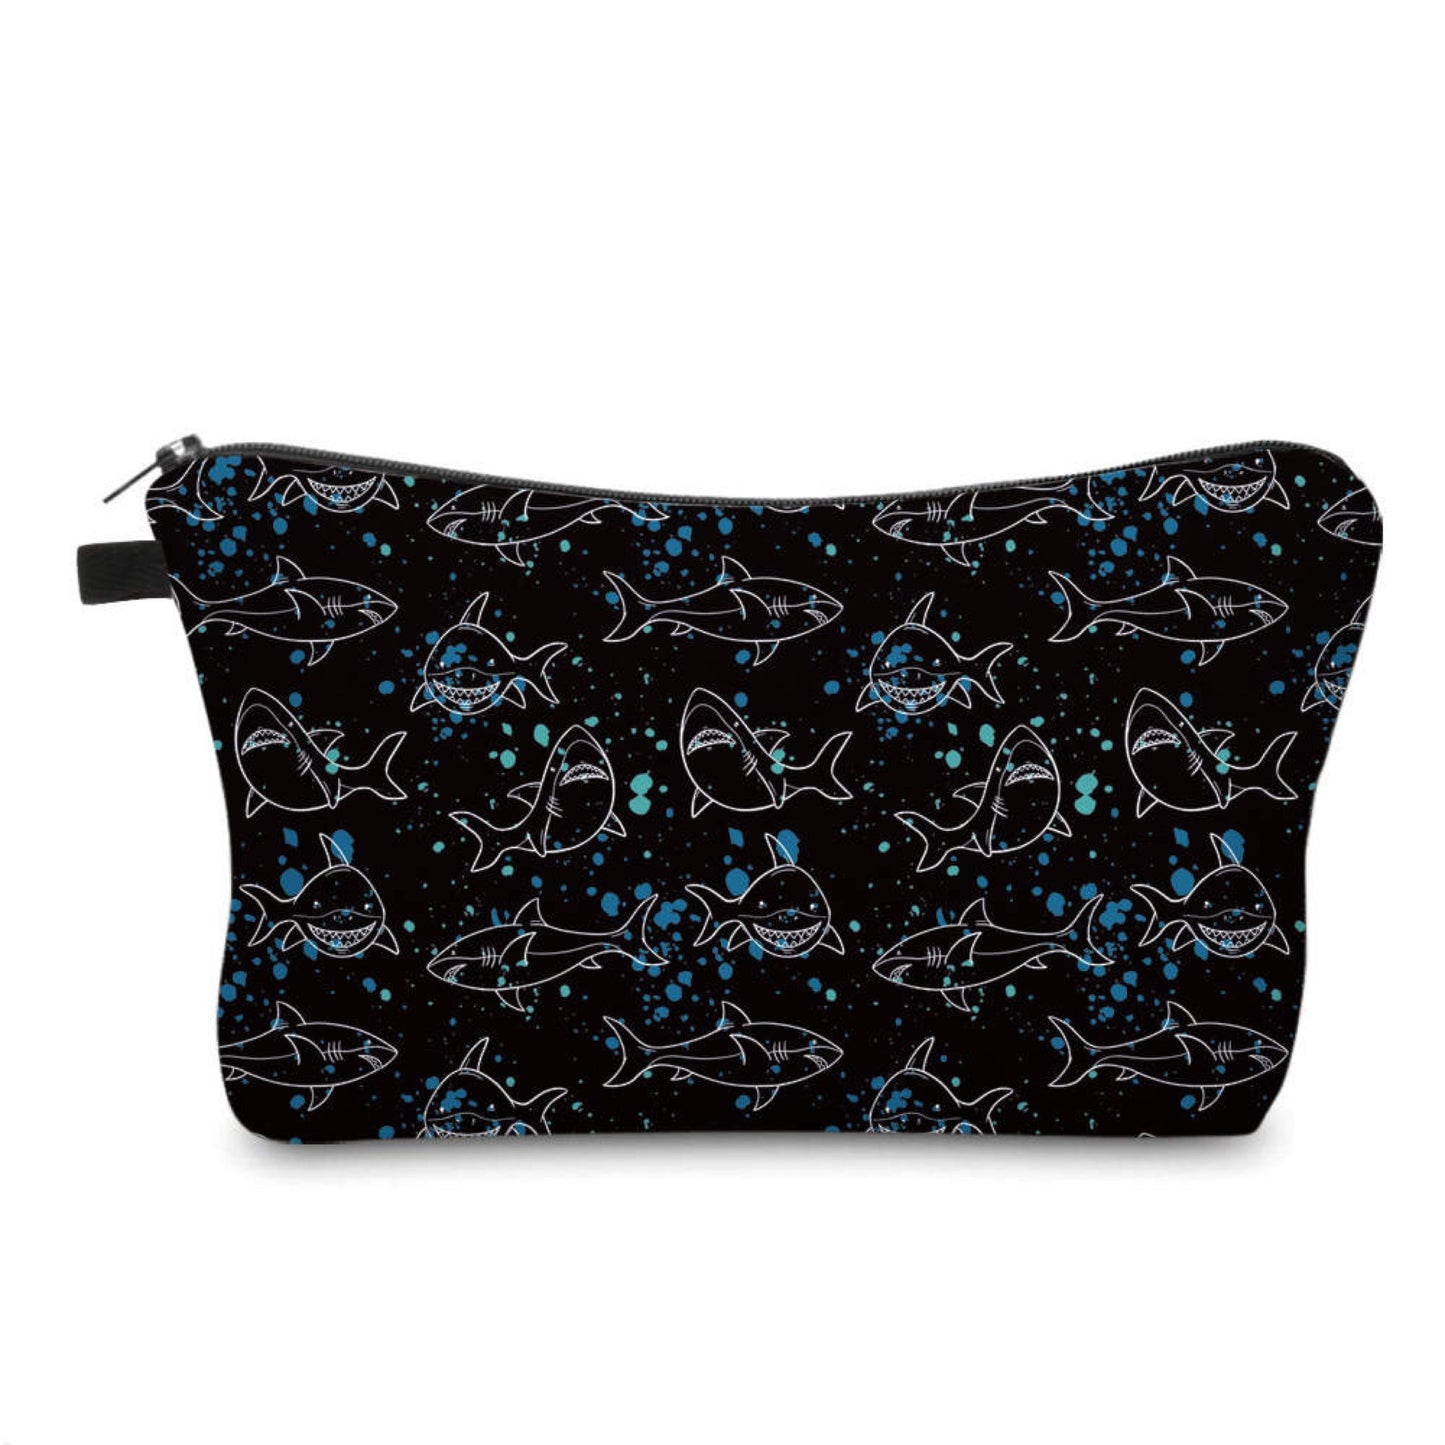 Sharks on Black - Water-Resistant Multi-Use Pouch